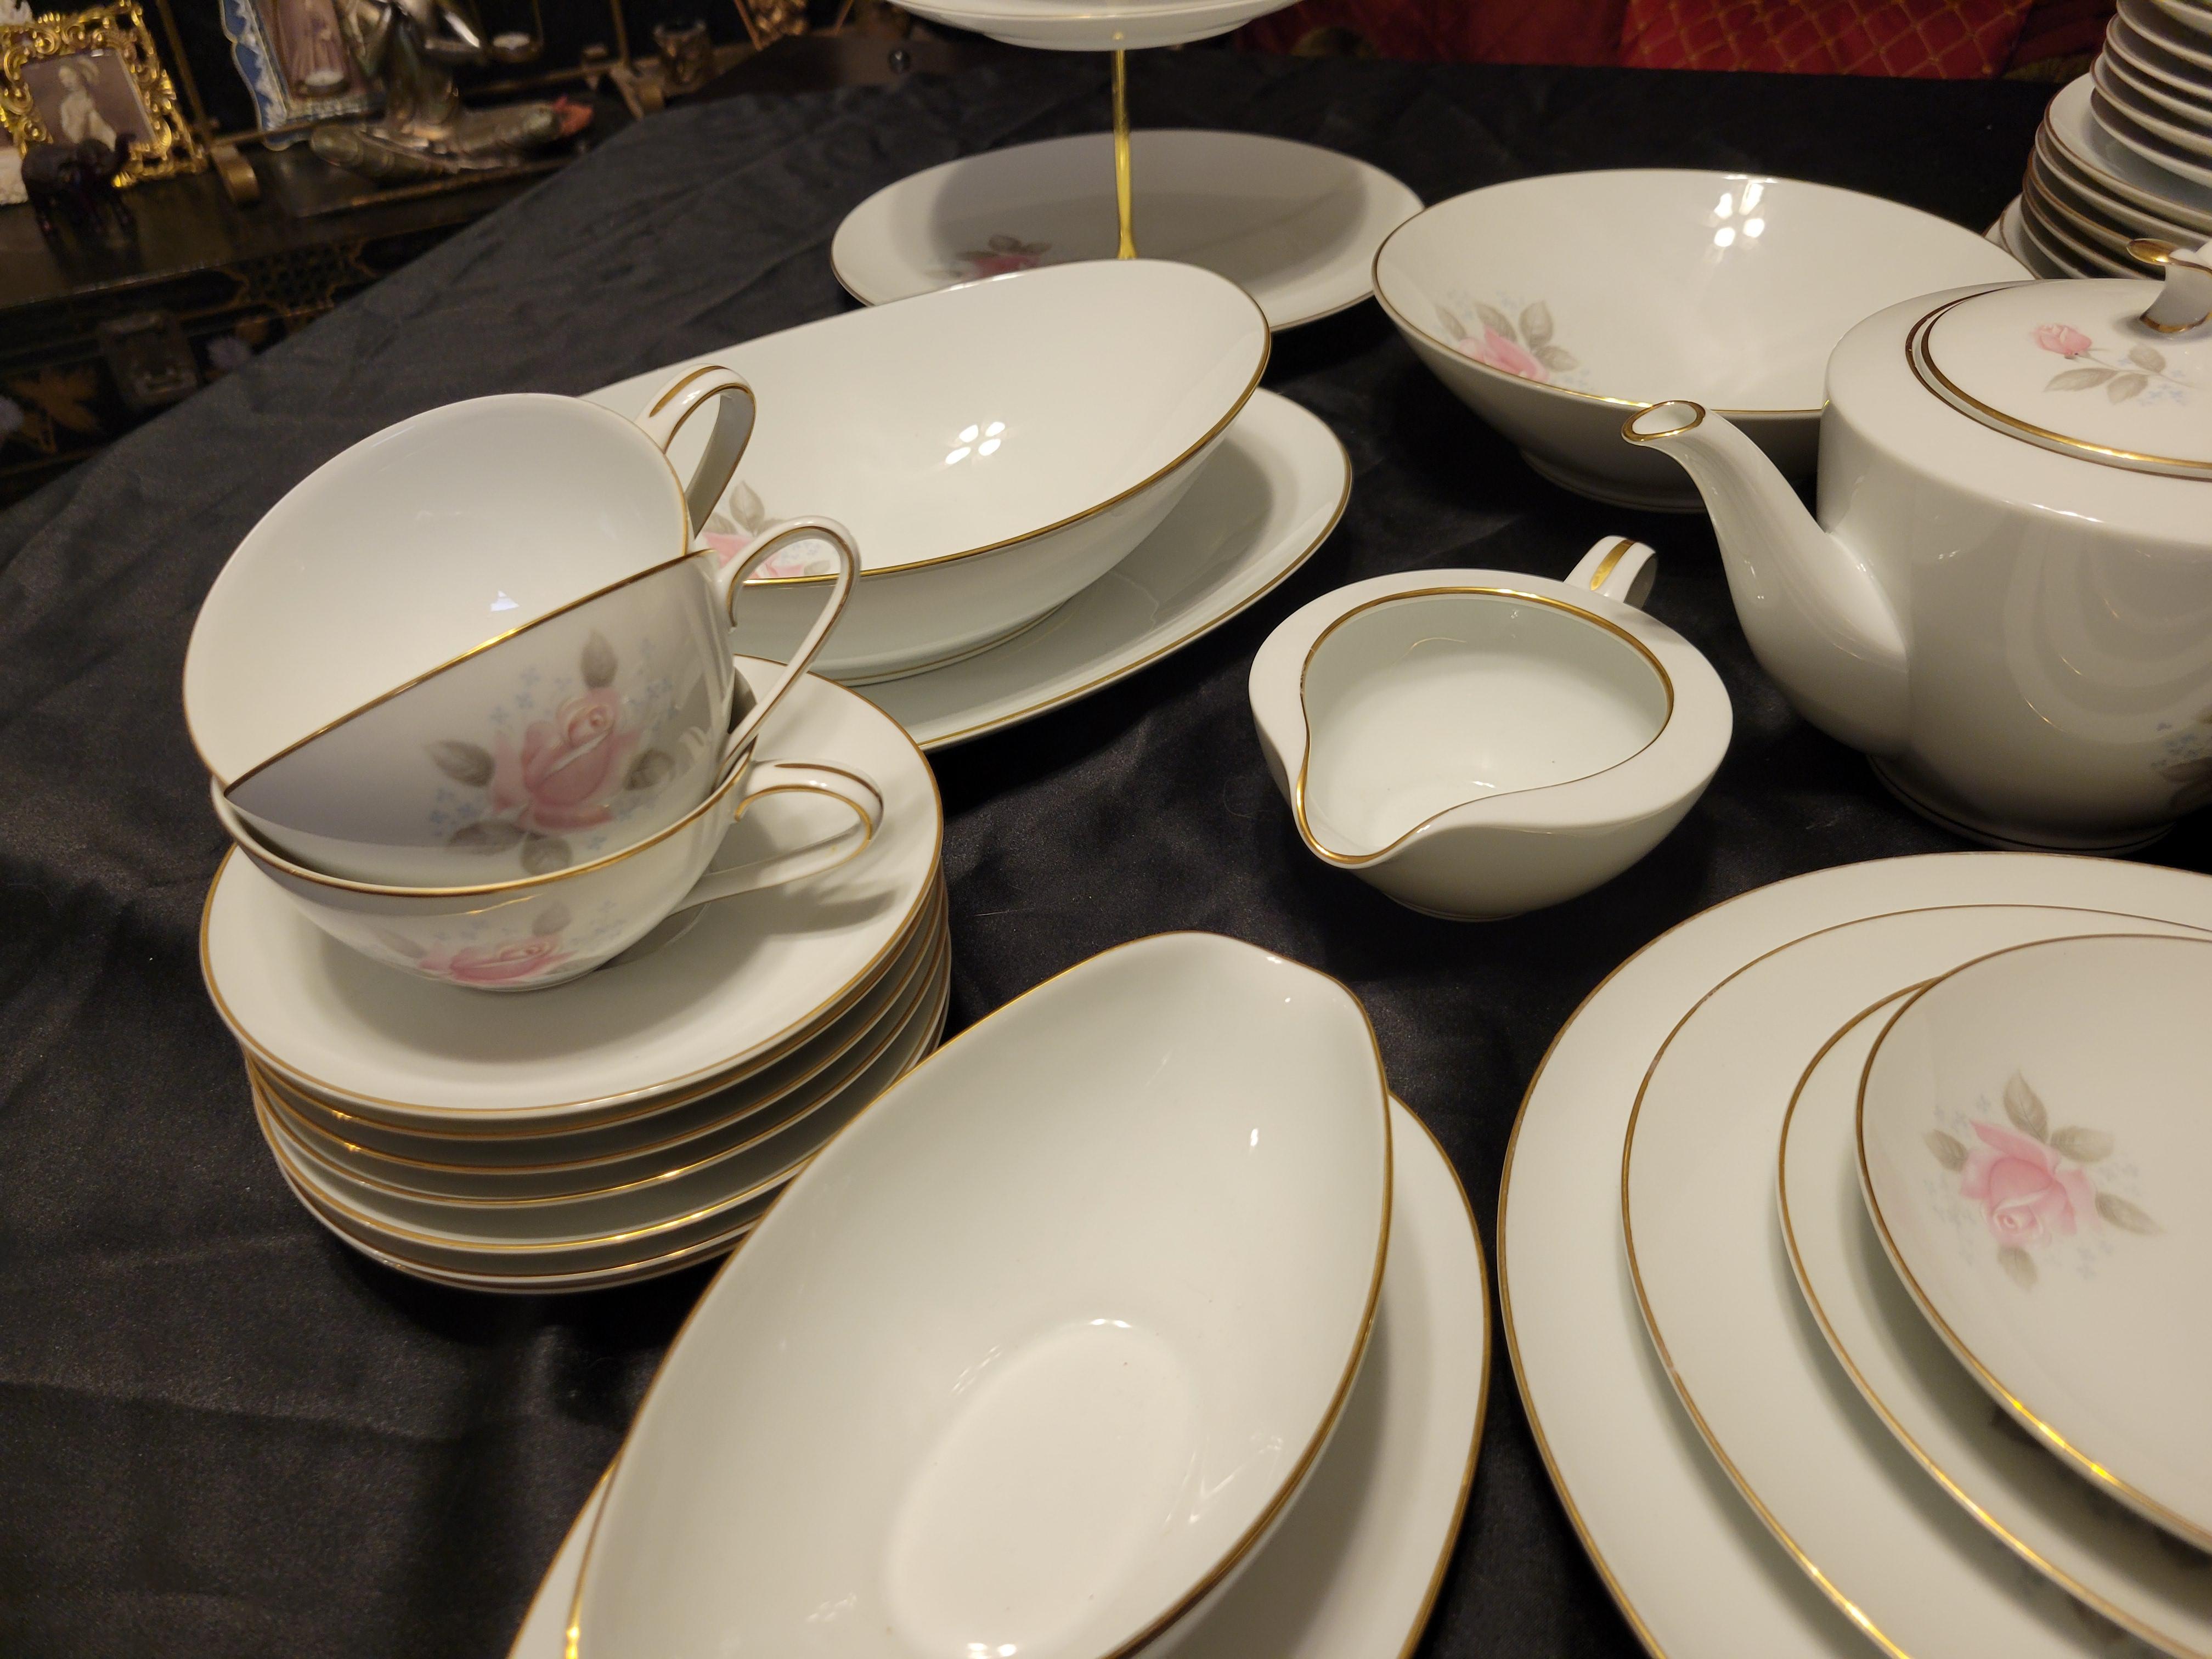 Vintage Noritake 'Roseville' Fine China Dining Set for 8 Persons - 79 Items For Sale 6